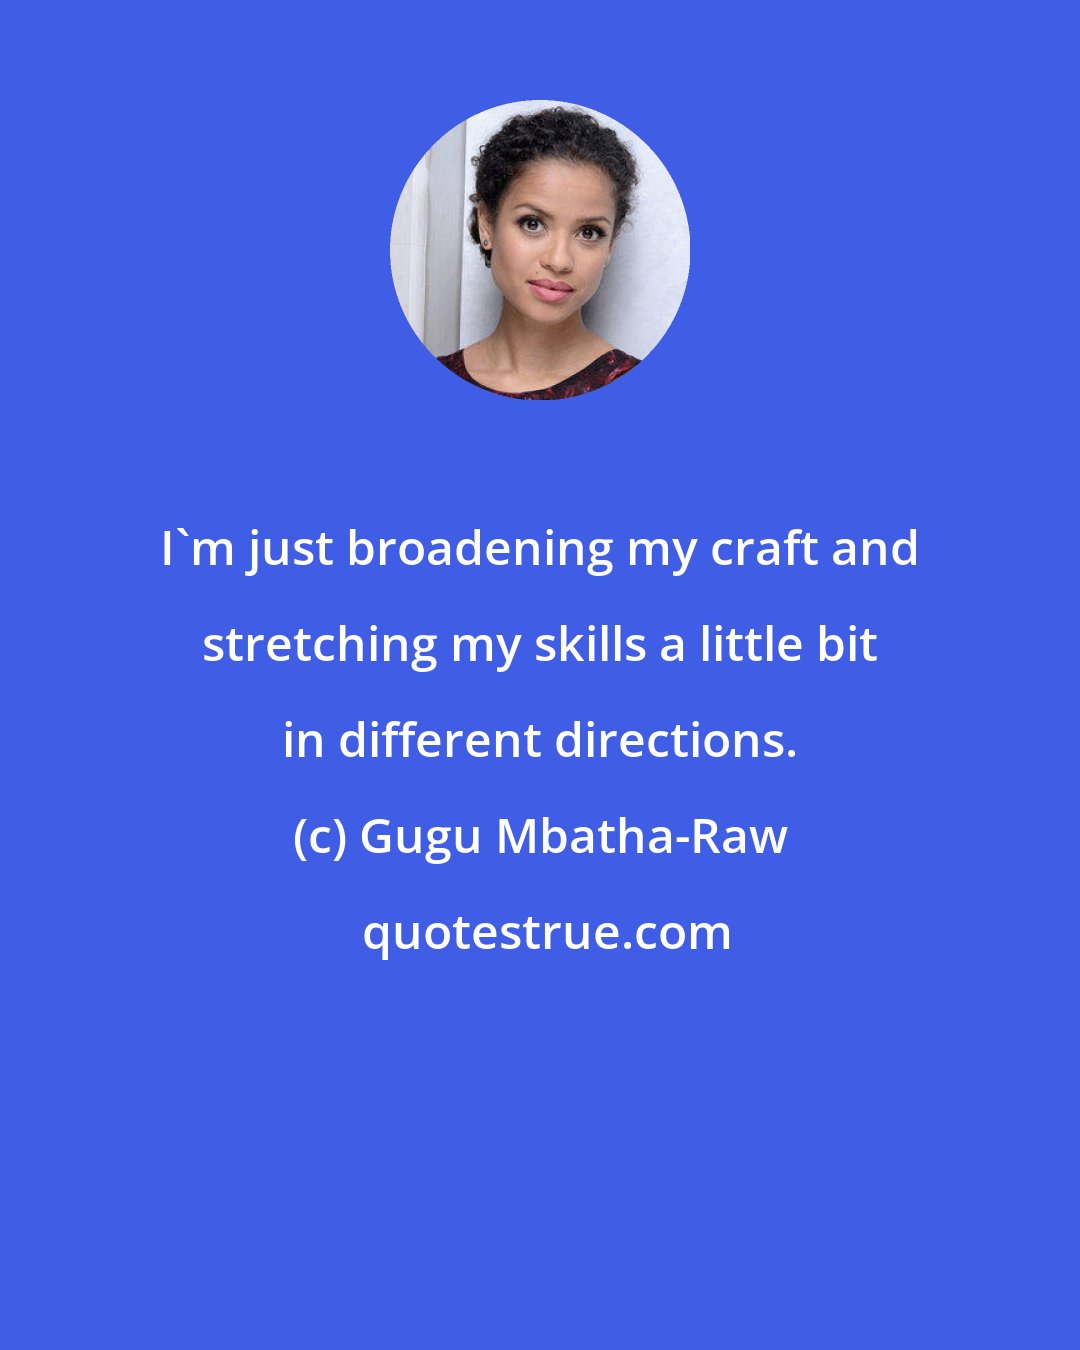 Gugu Mbatha-Raw: I'm just broadening my craft and stretching my skills a little bit in different directions.